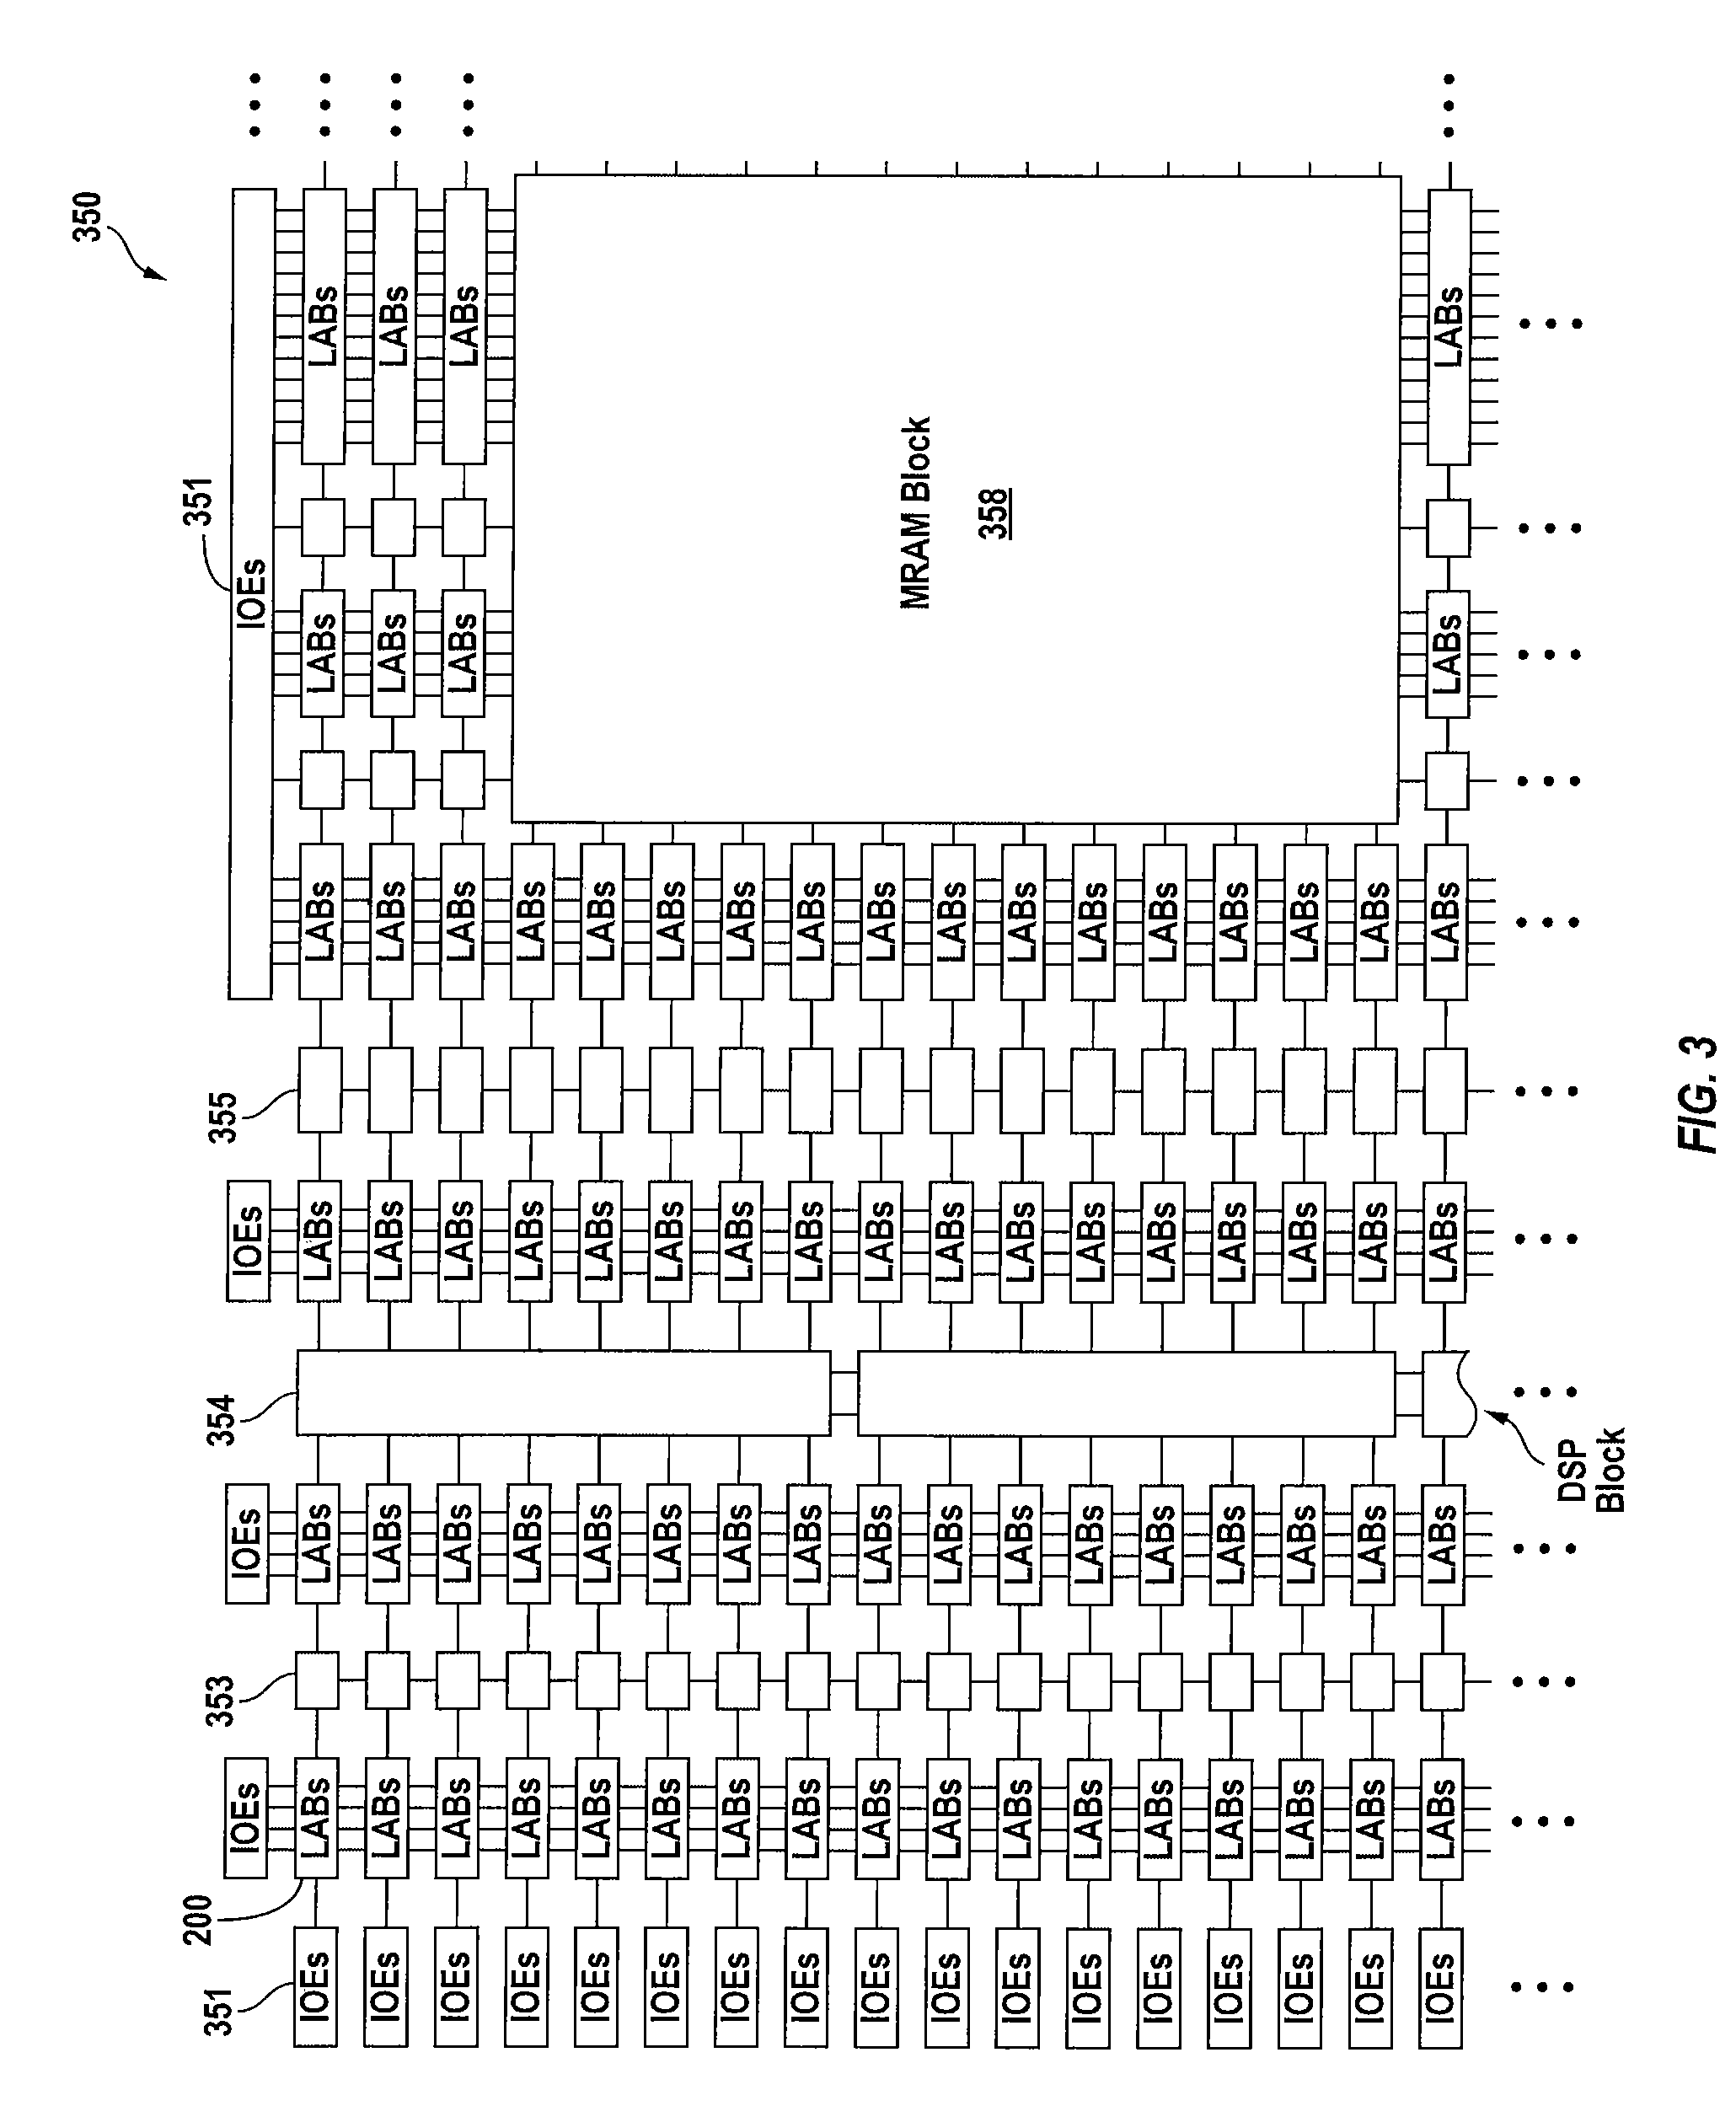 Automatic test configuration generation facilitating repair of programmable circuits